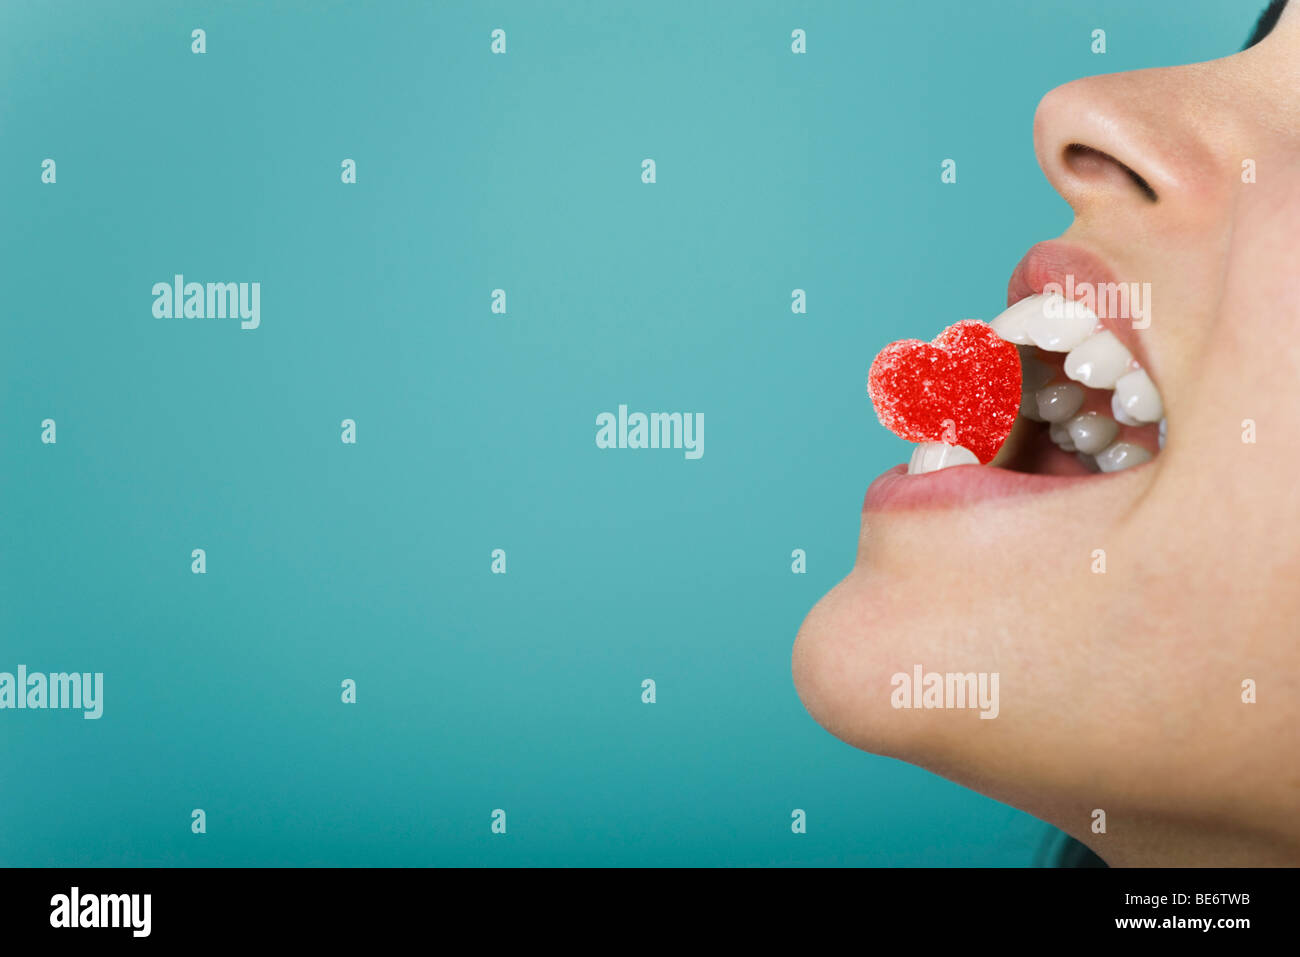 Woman holding heart-shaped candy between teeth, cropped Stock Photo